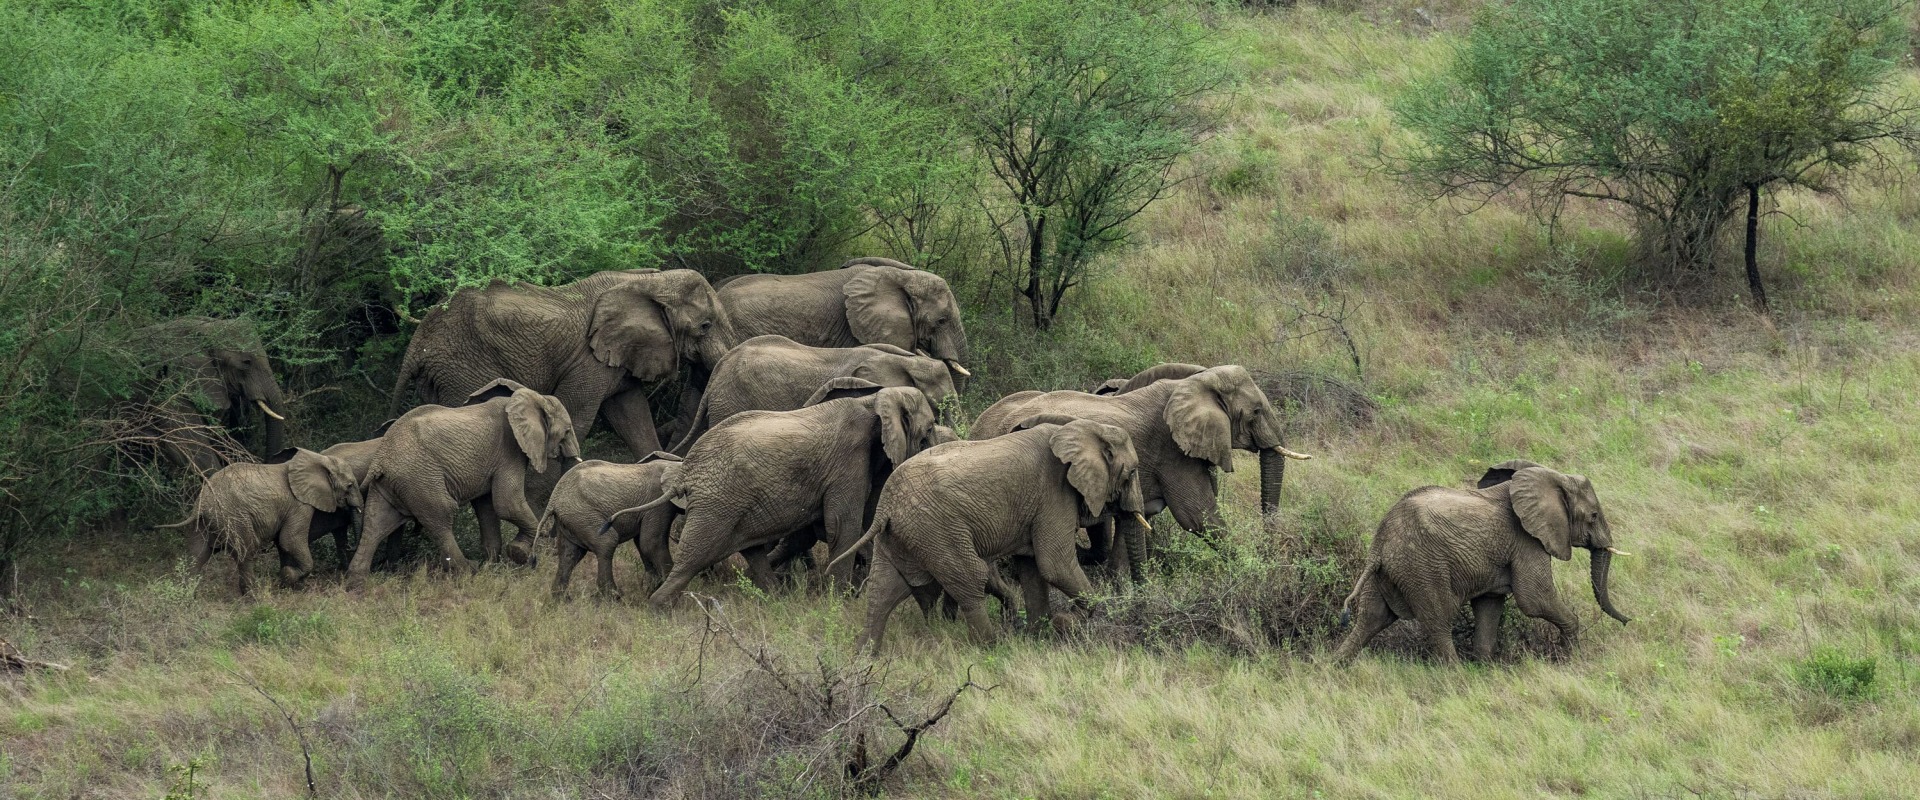 A herd of elephants in Boma and Badingilo National Parks, South Sudan, courtesy African Parks/© Marcus Westberg